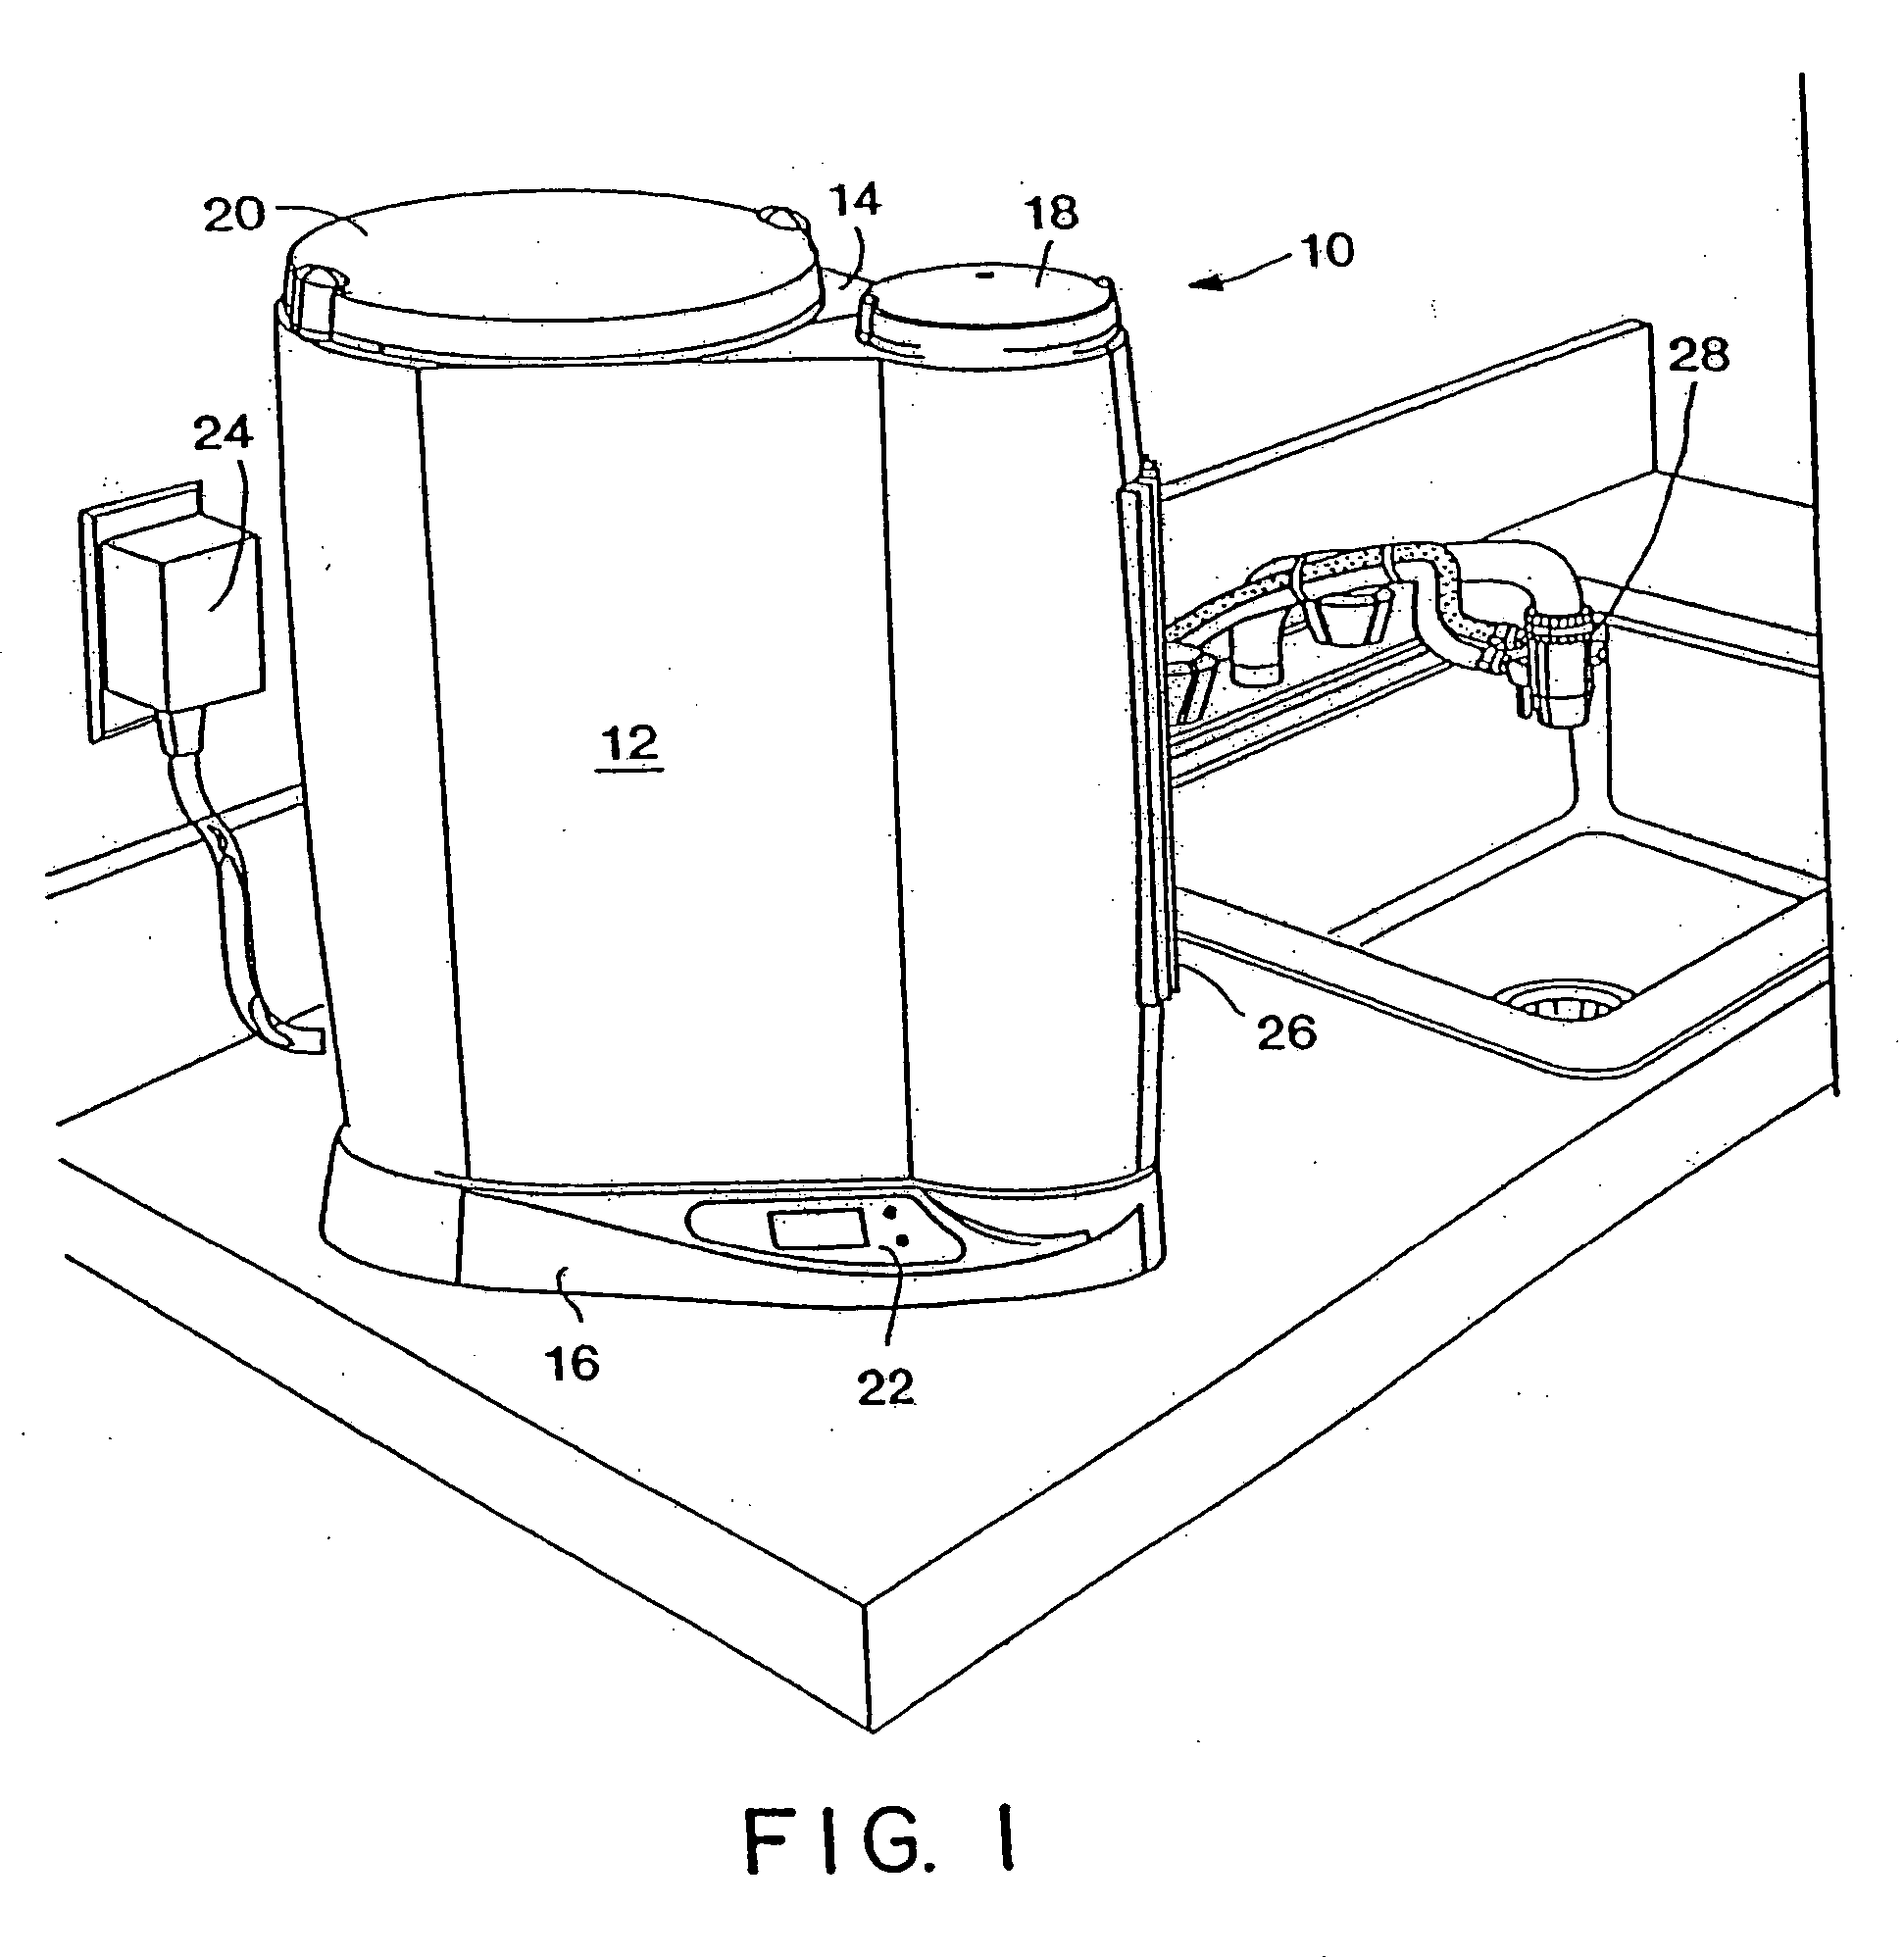 Point-of-use water treatment system